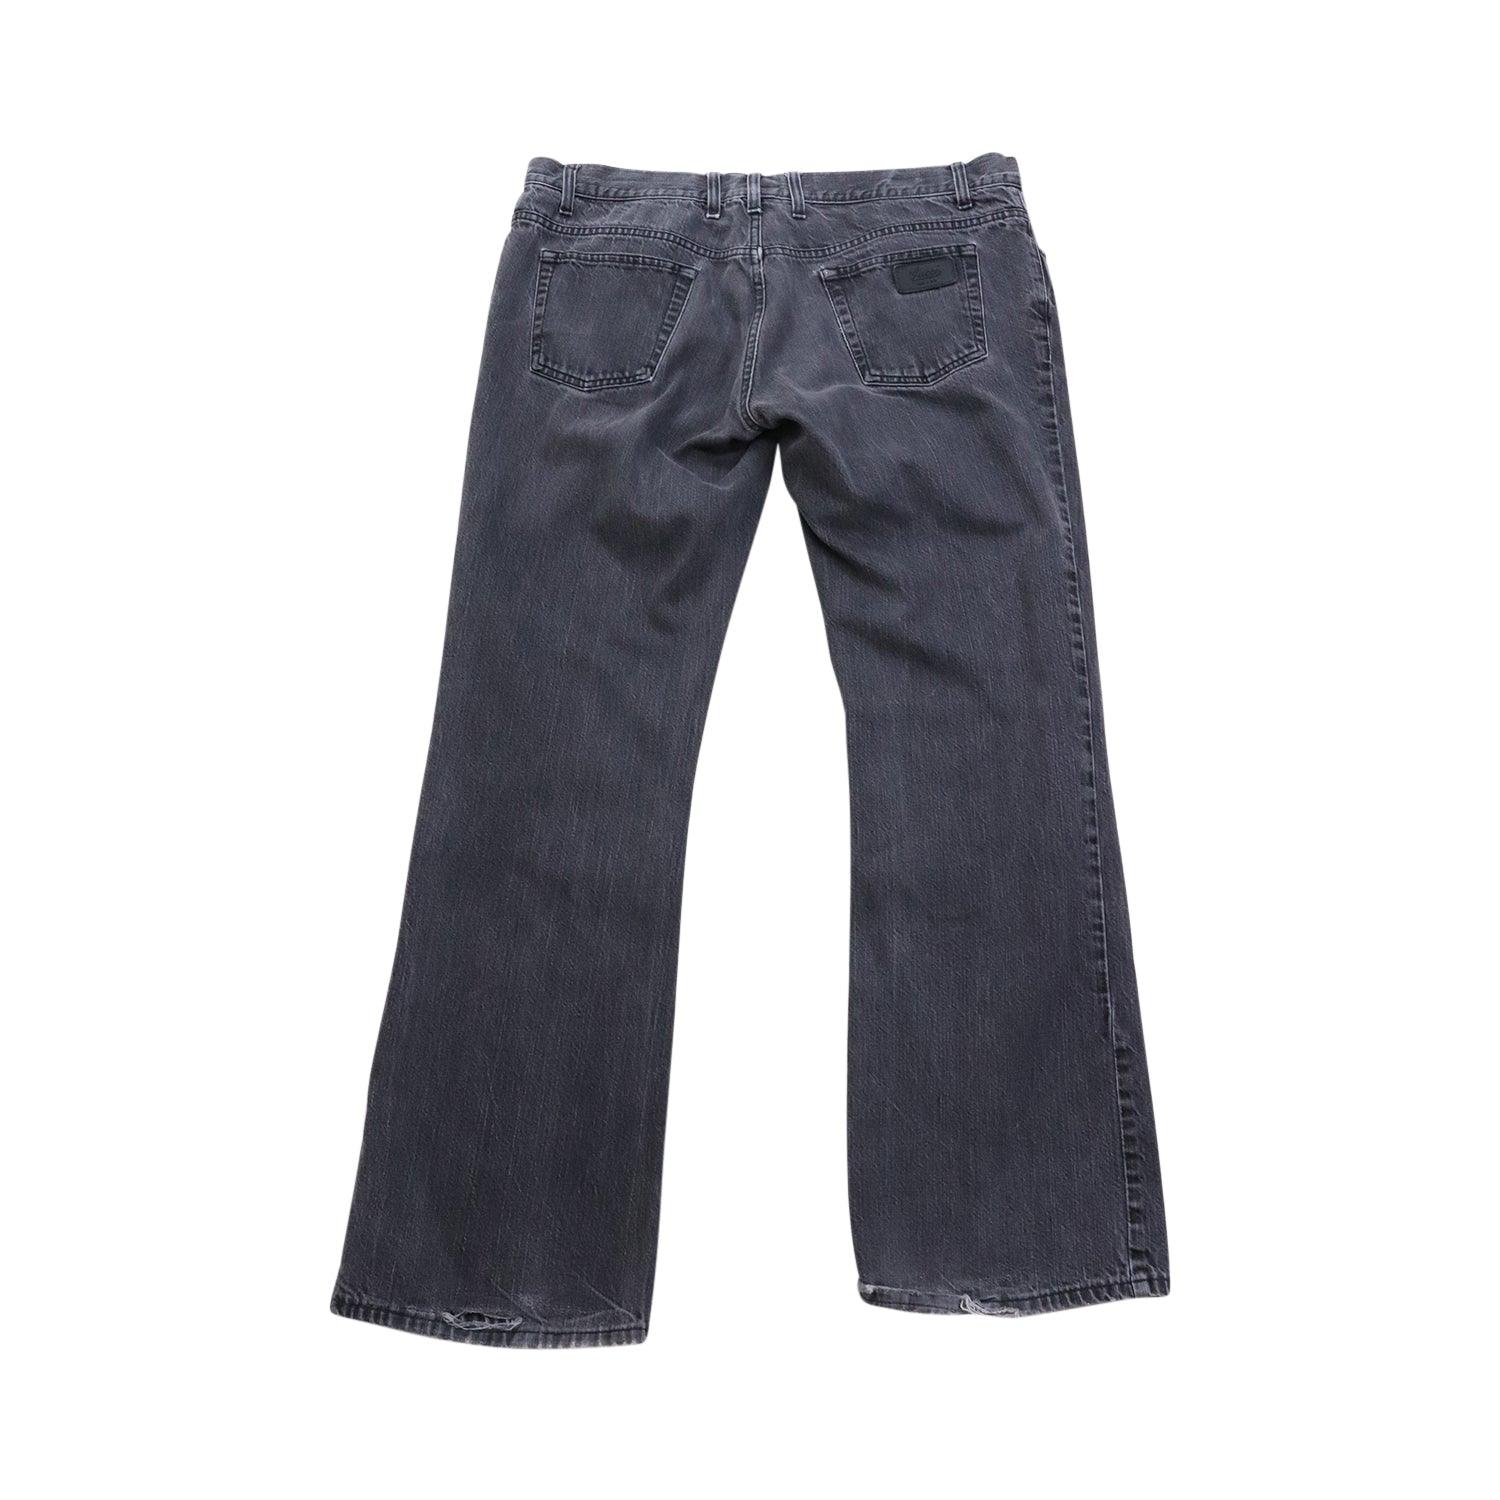 Gucci Jeans - Men's 56 - Fashionably Yours